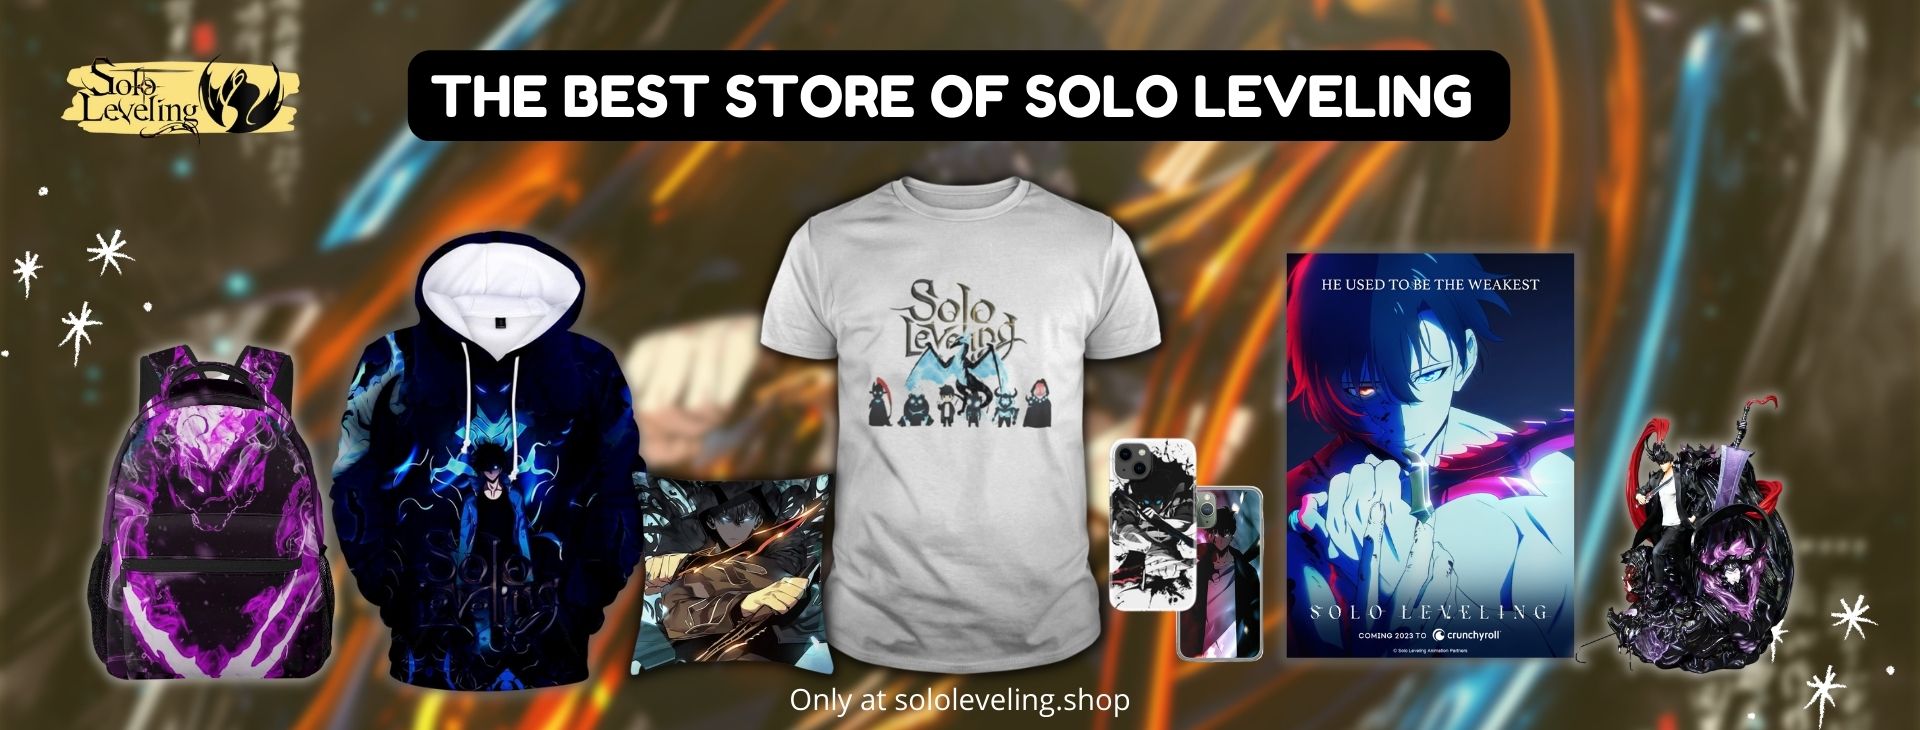 Solo Leveling Banner - Solo Leveling Shop